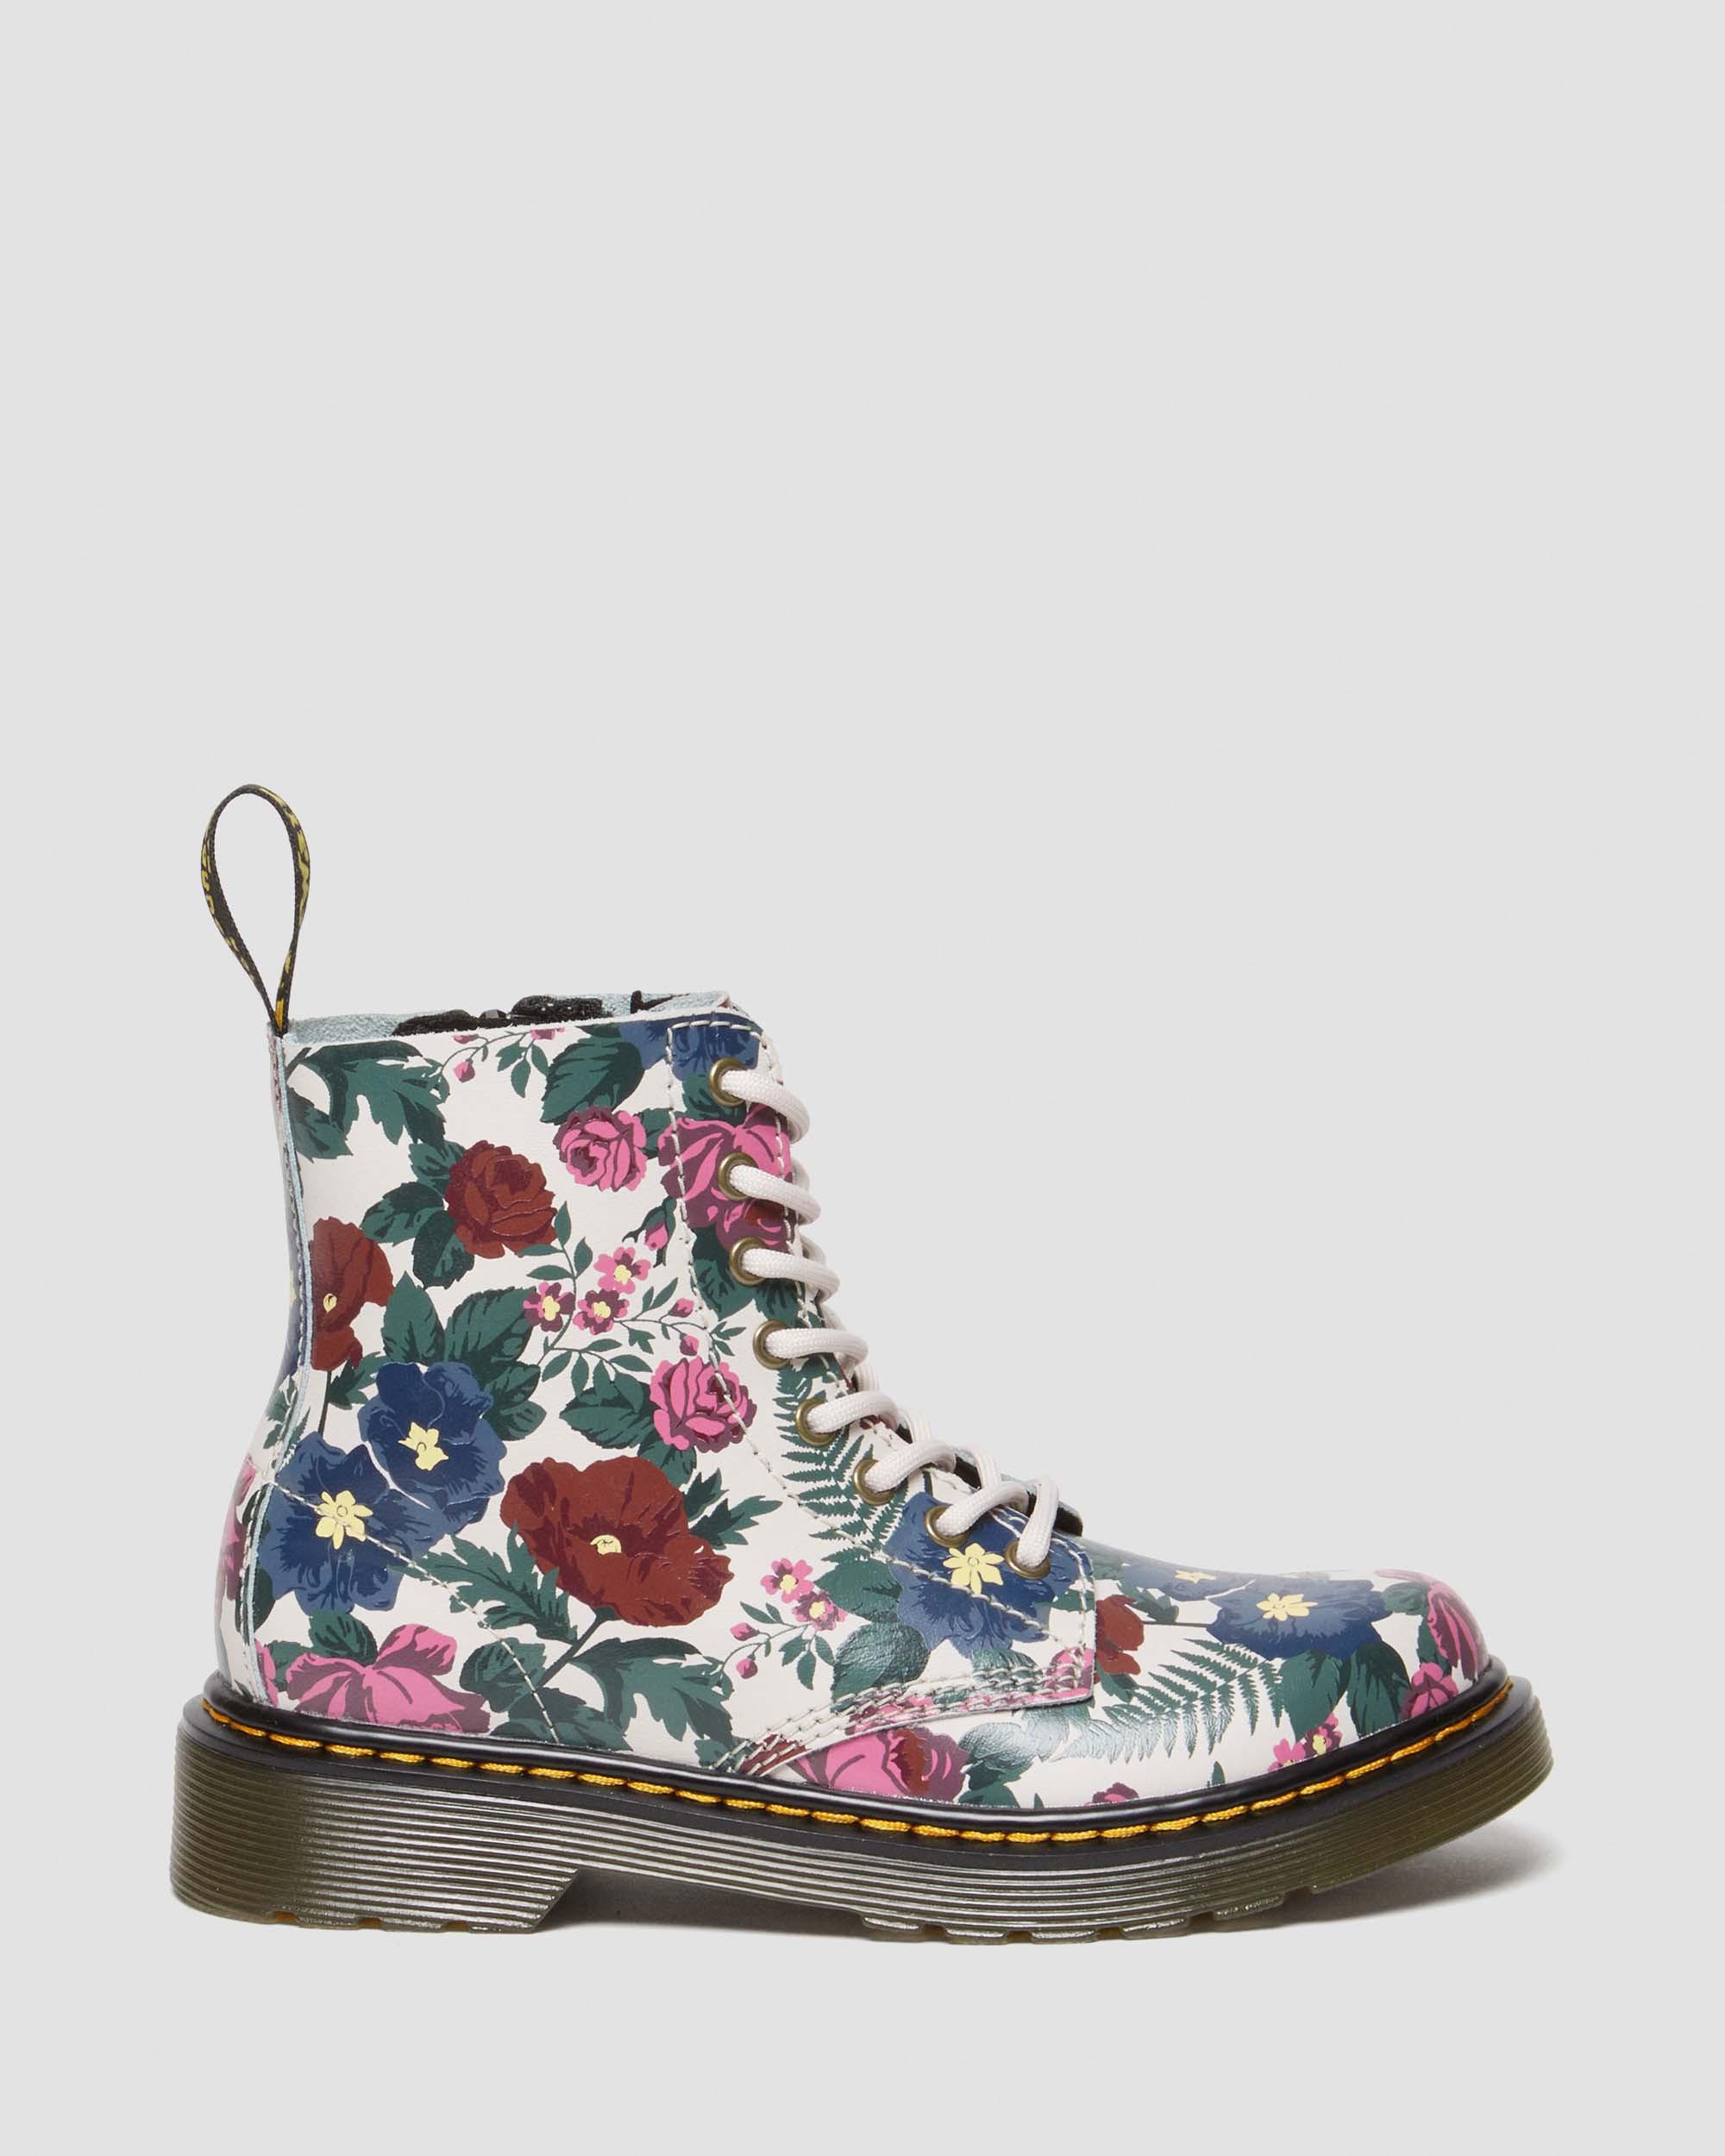 Junior 1460 English Garden Leather Lace Up BootsJunior 1460 English Garden Leather Lace Up Boots Dr. Martens